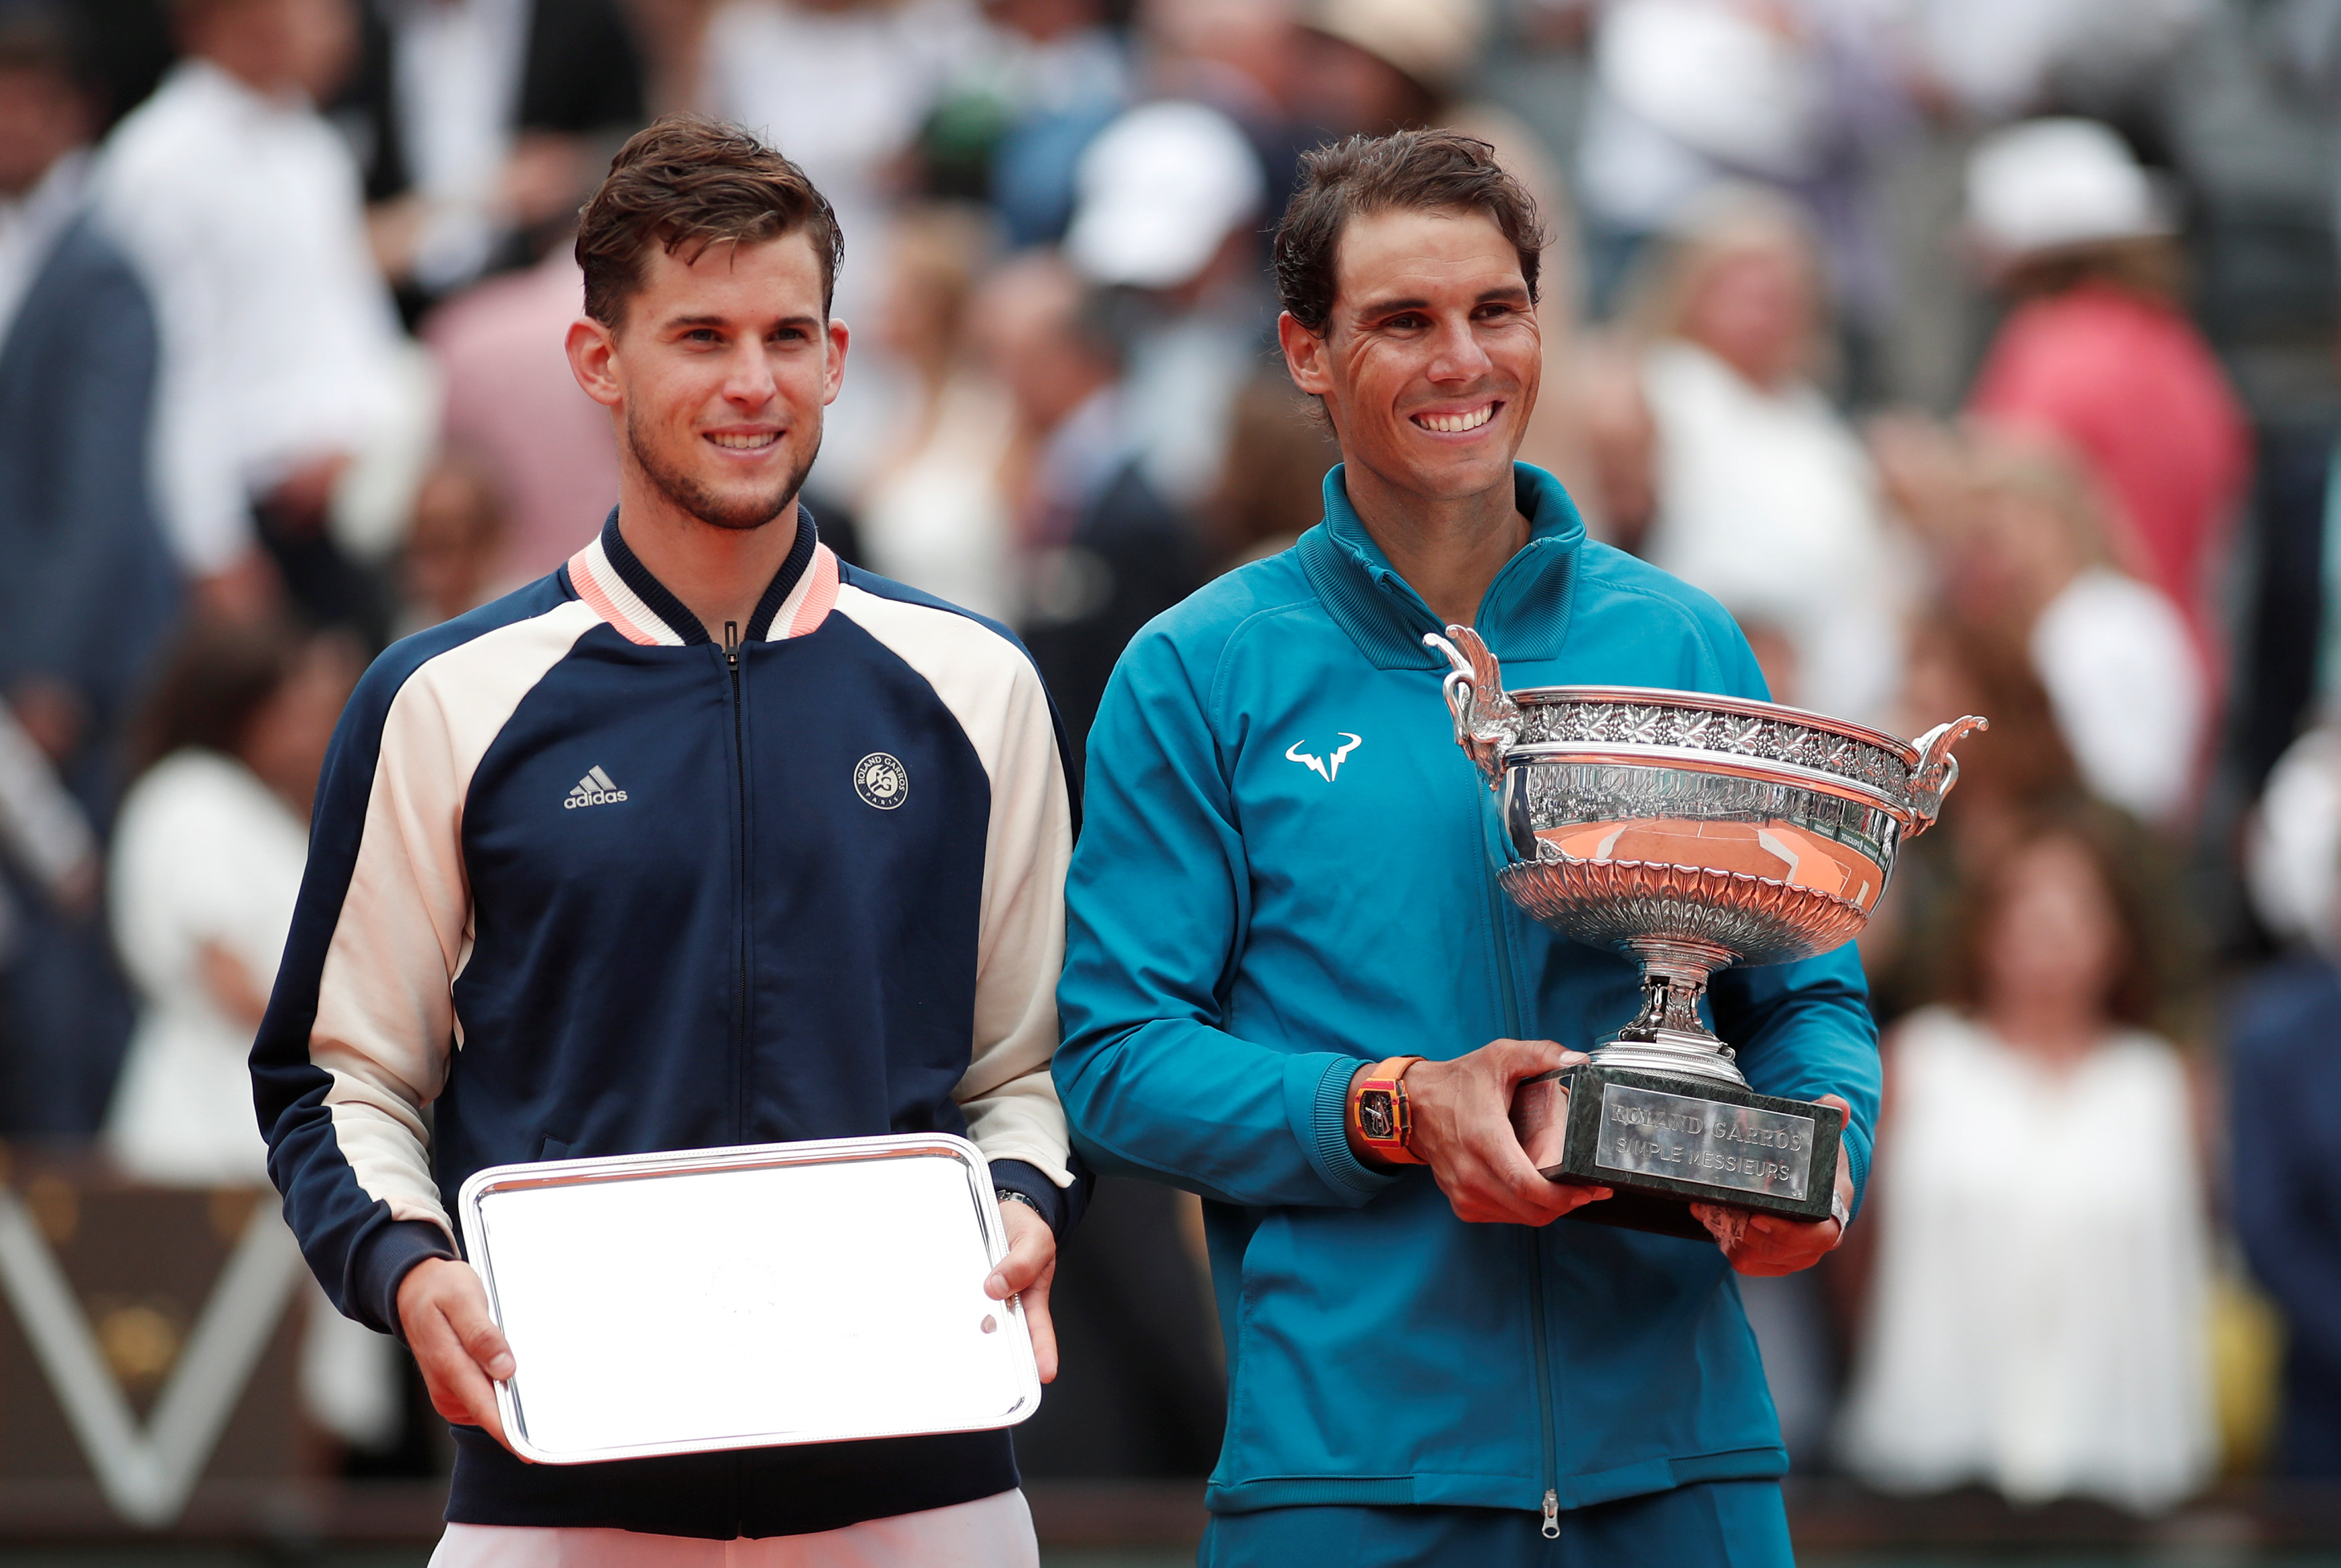 Nadal routs Thiem to claim 11th French Open title